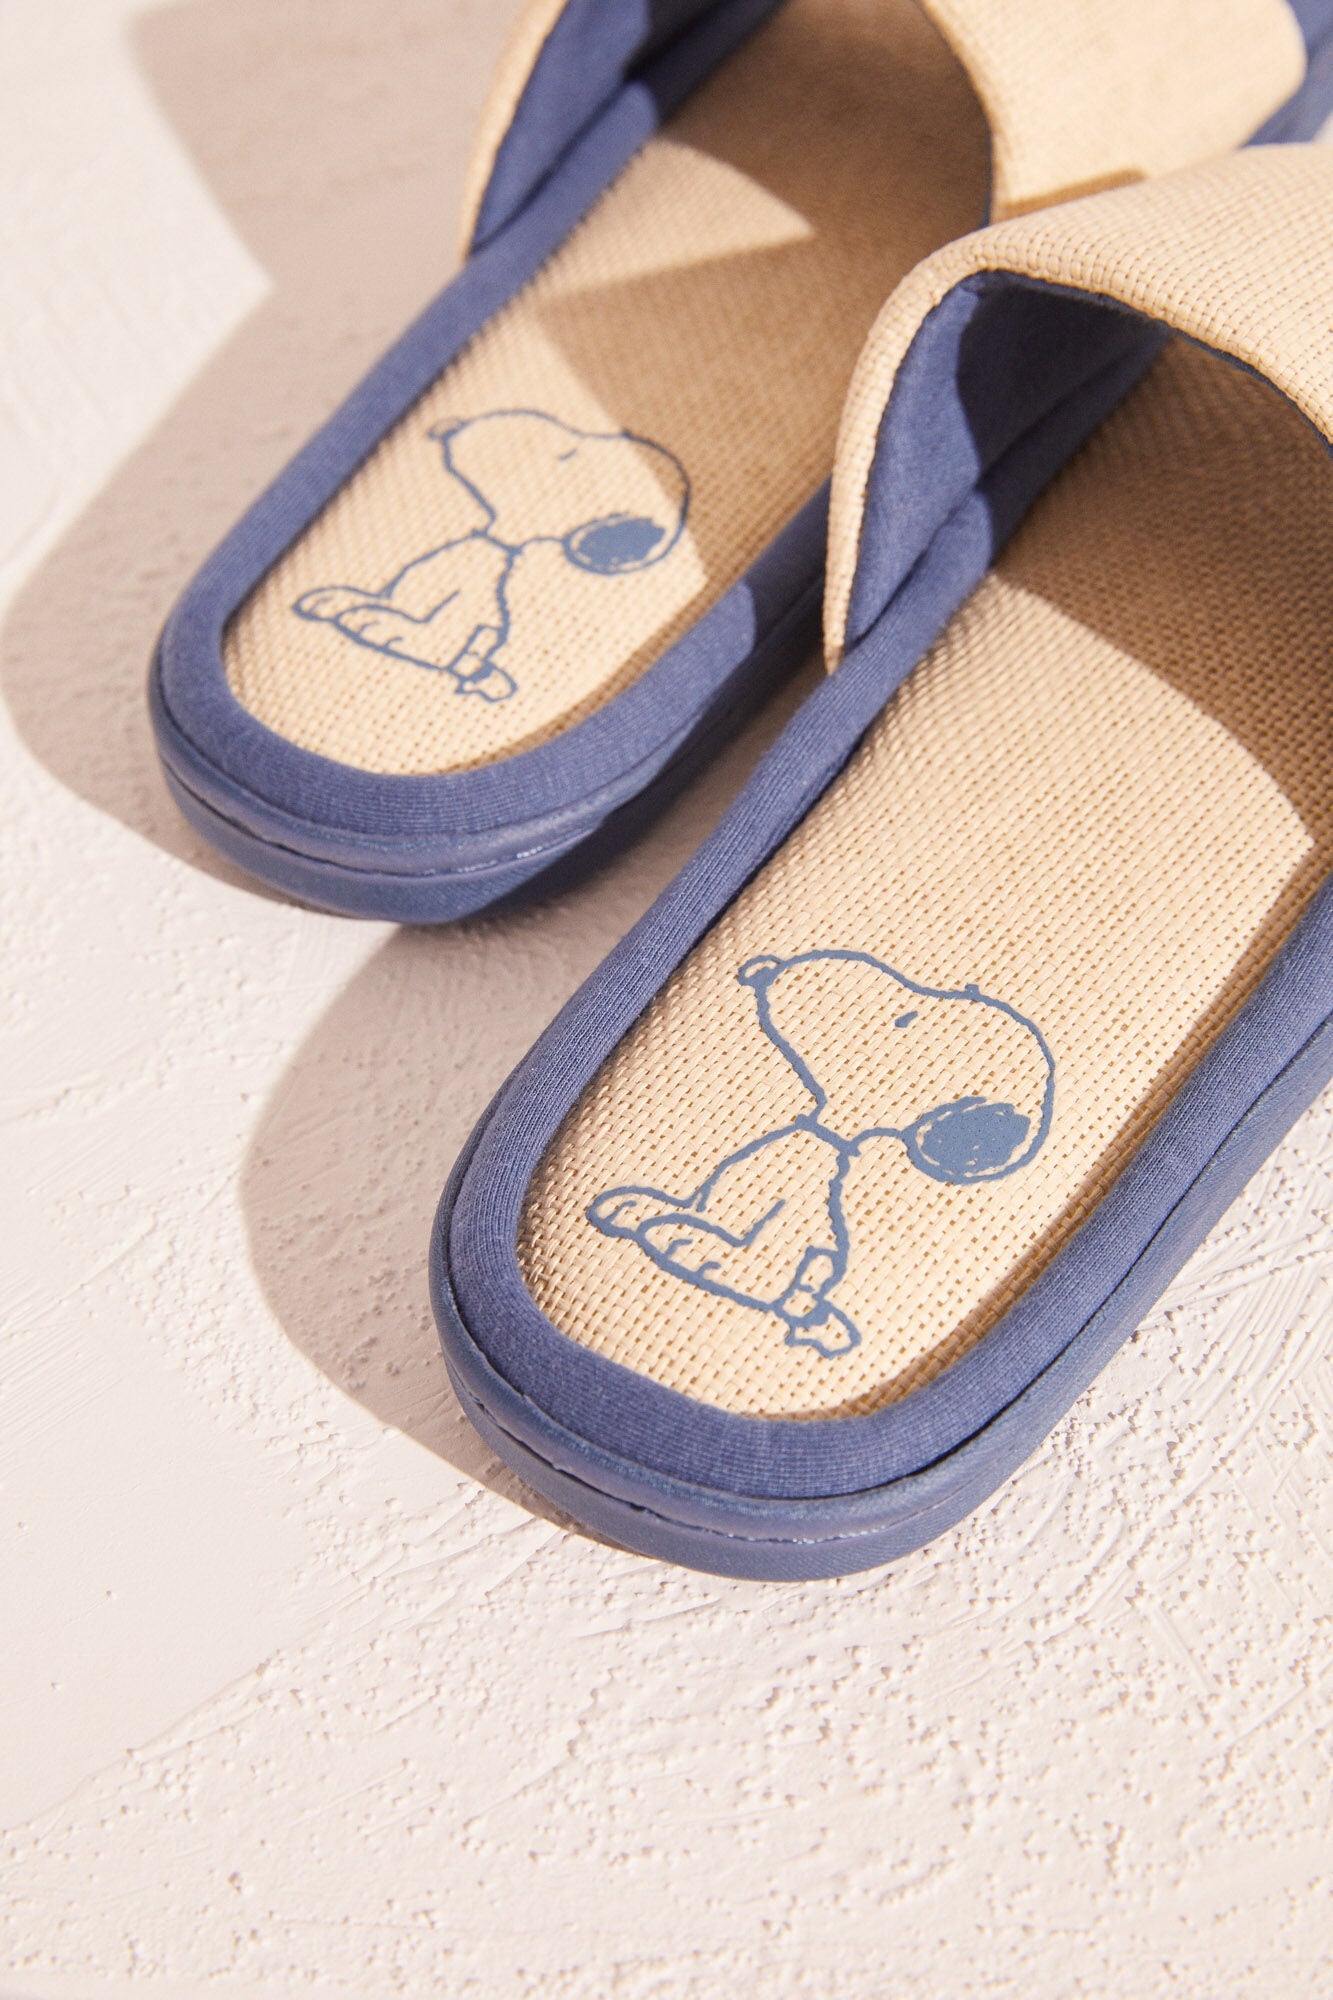 Open shoes with snoppy print